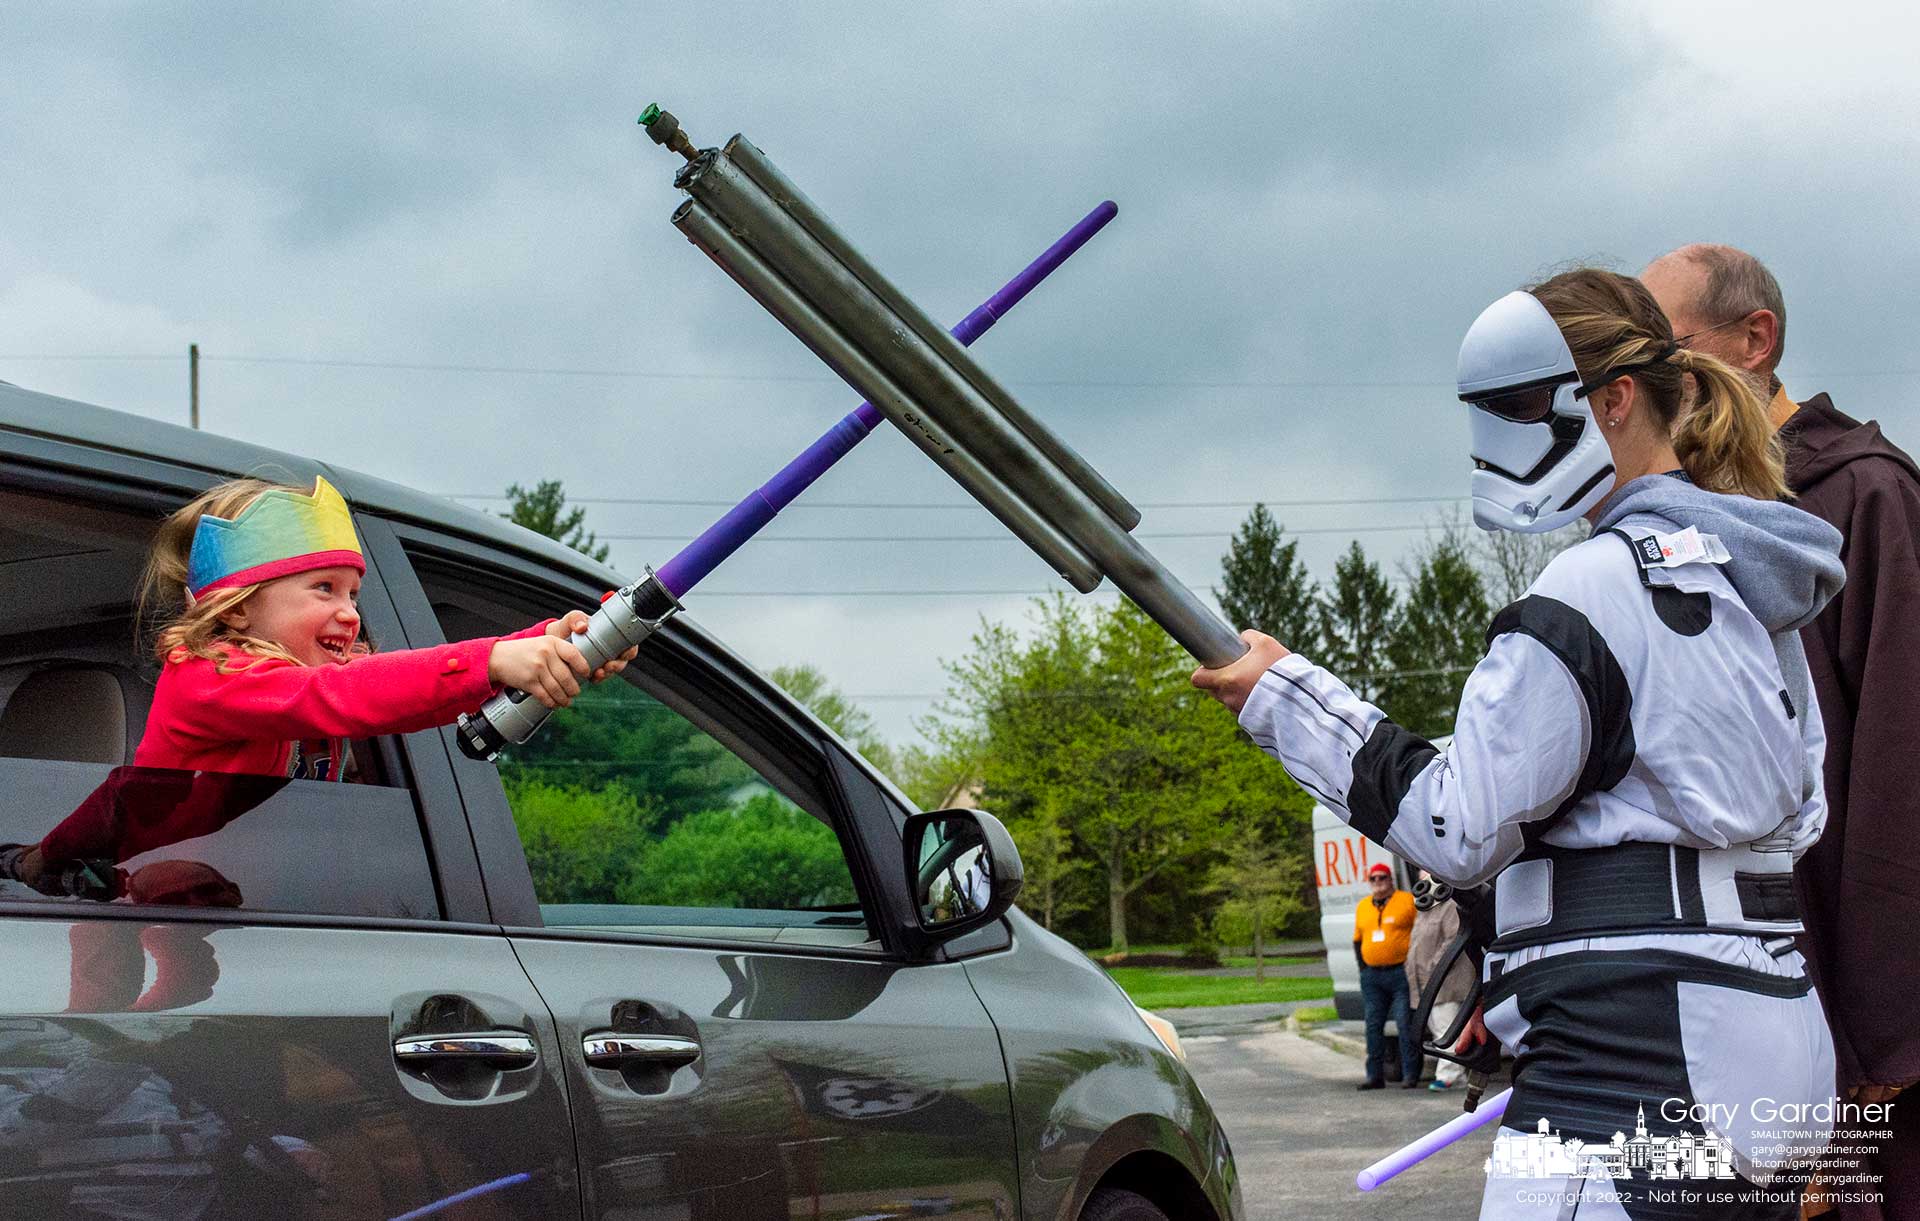 A youngster leans through the open window of her parent's car using her lightsaber to battle Imperial Stormtroopers at the W.A.R.M. food dropoff at Highlands Park. My Final Photo for May 4, 2022.